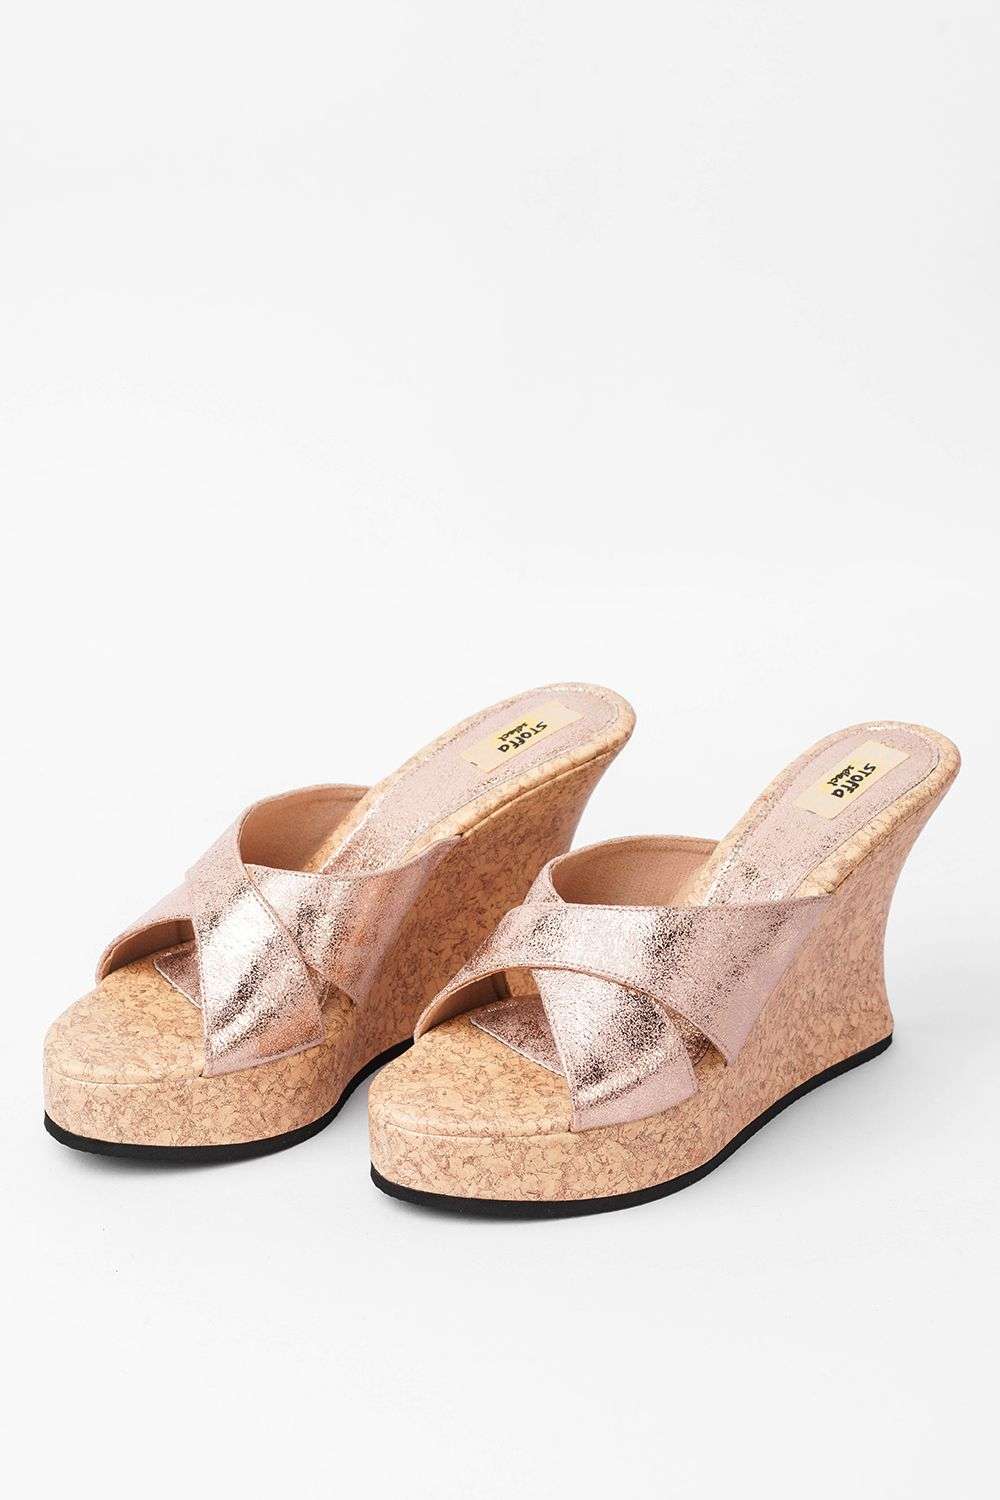 Buy Mochi Women's Rose Gold Cross Strap Wedges for Women at Best Price @  Tata CLiQ